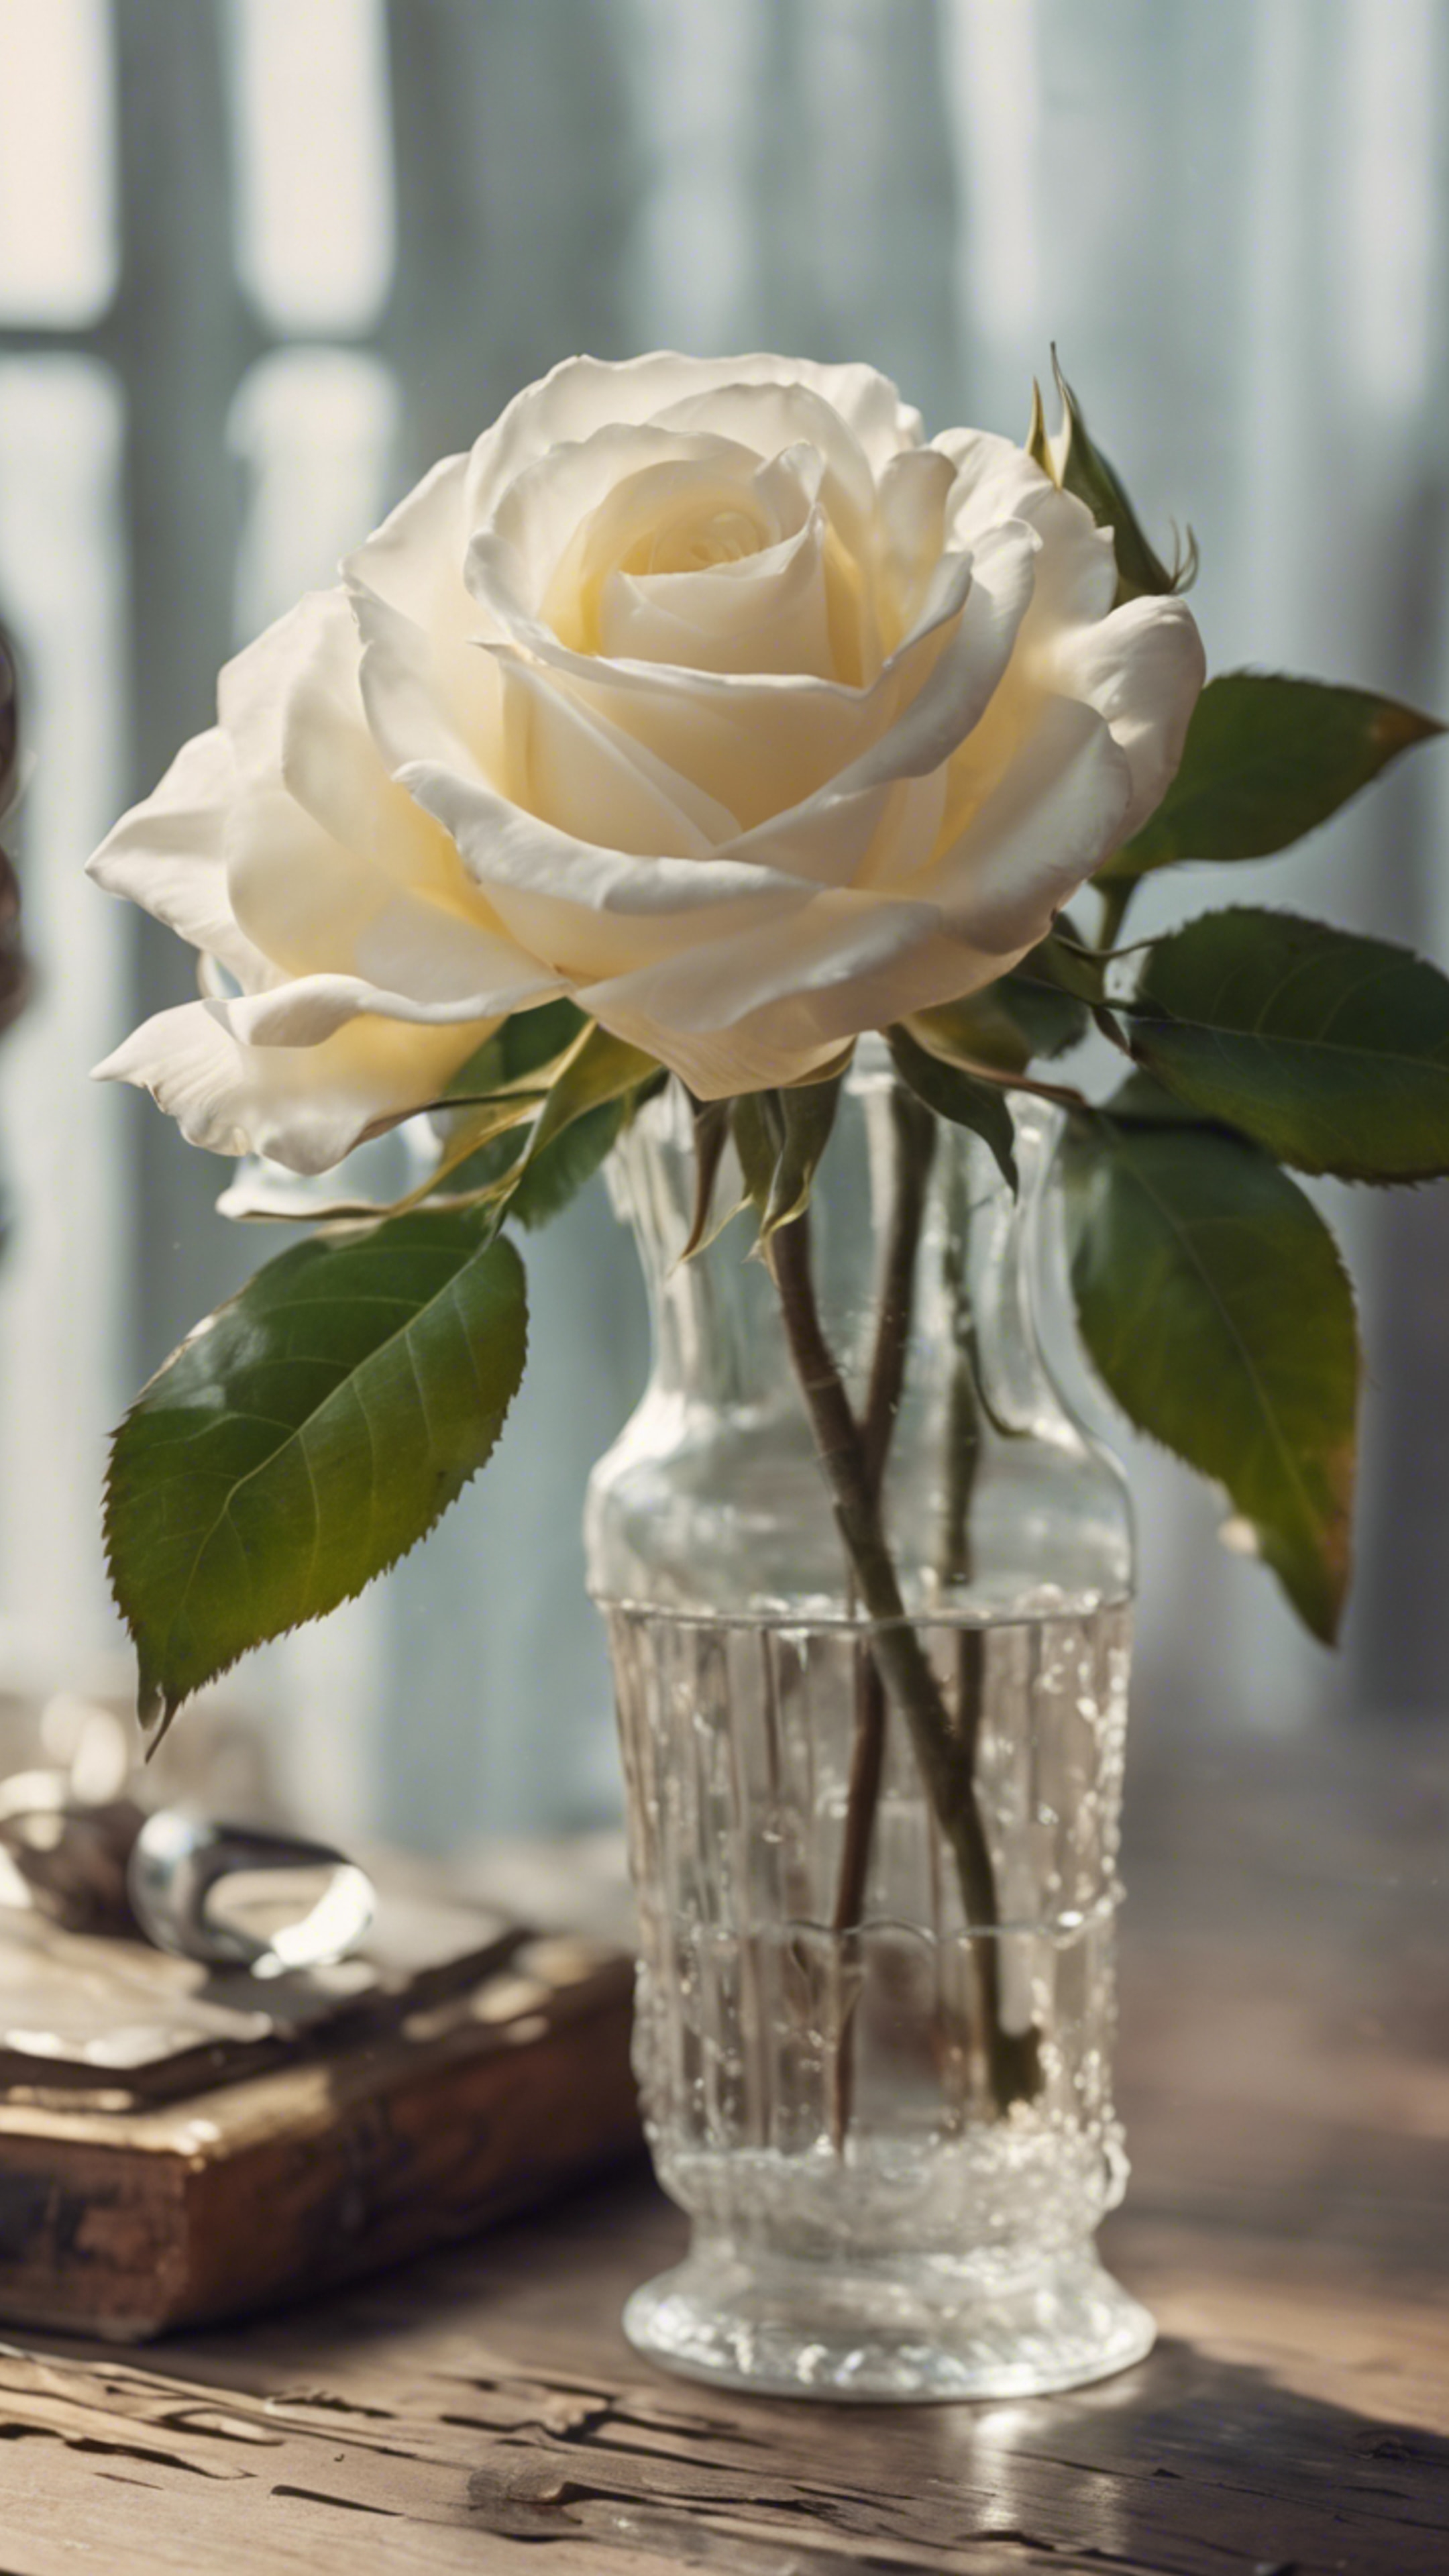 A soft white rose in a vintage glass vase on an antique wooden table. Tapeta na zeď[fc4486b9e2ee4669bbfe]